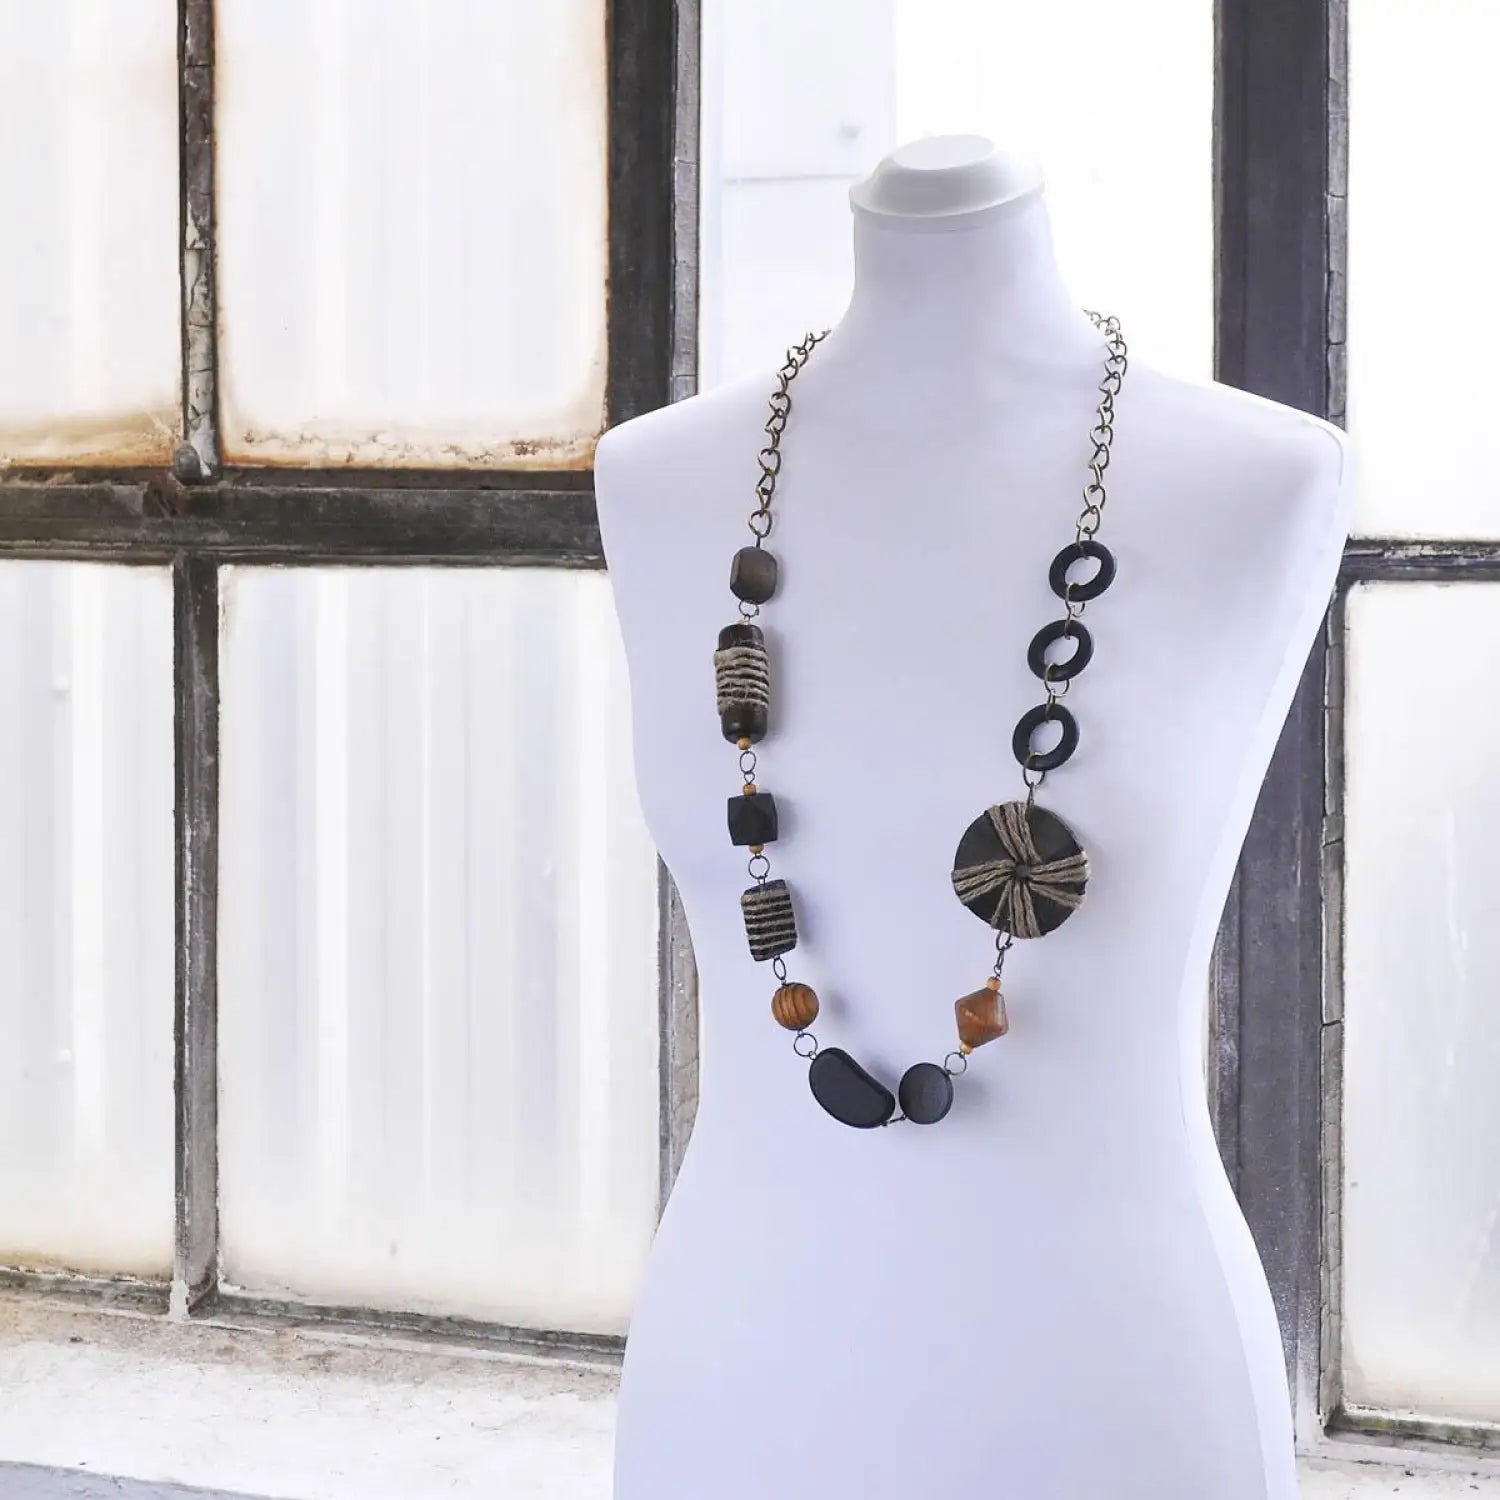 Art Patterned Wooden Beads Long Necklace main image: mannequin with necklace.